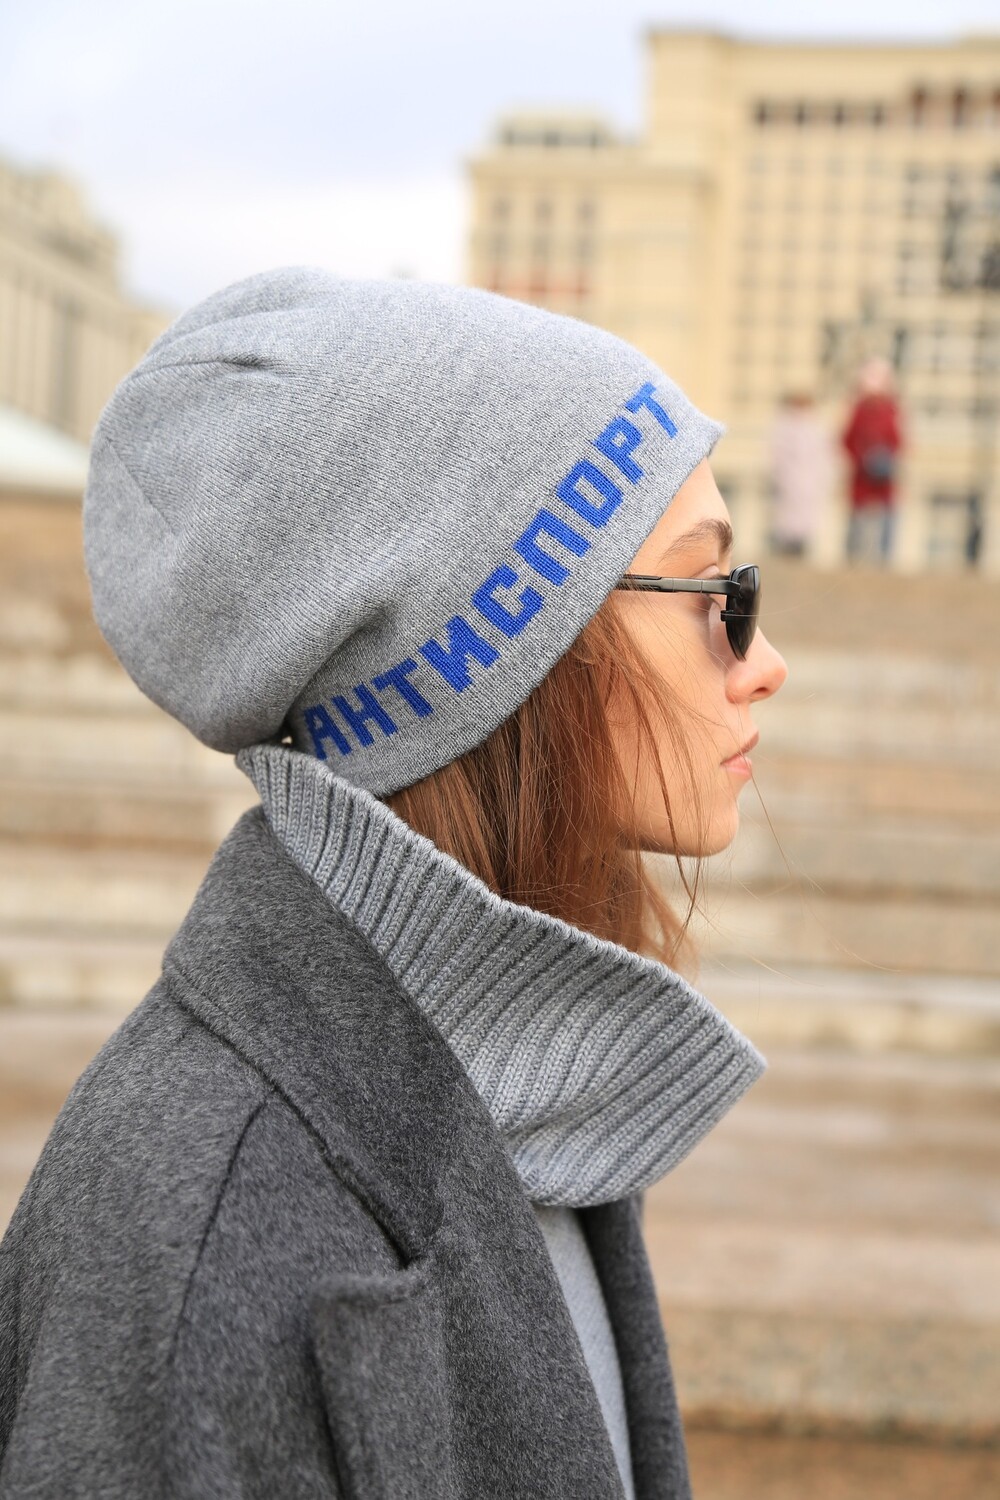 Antisport hat with blue lettering